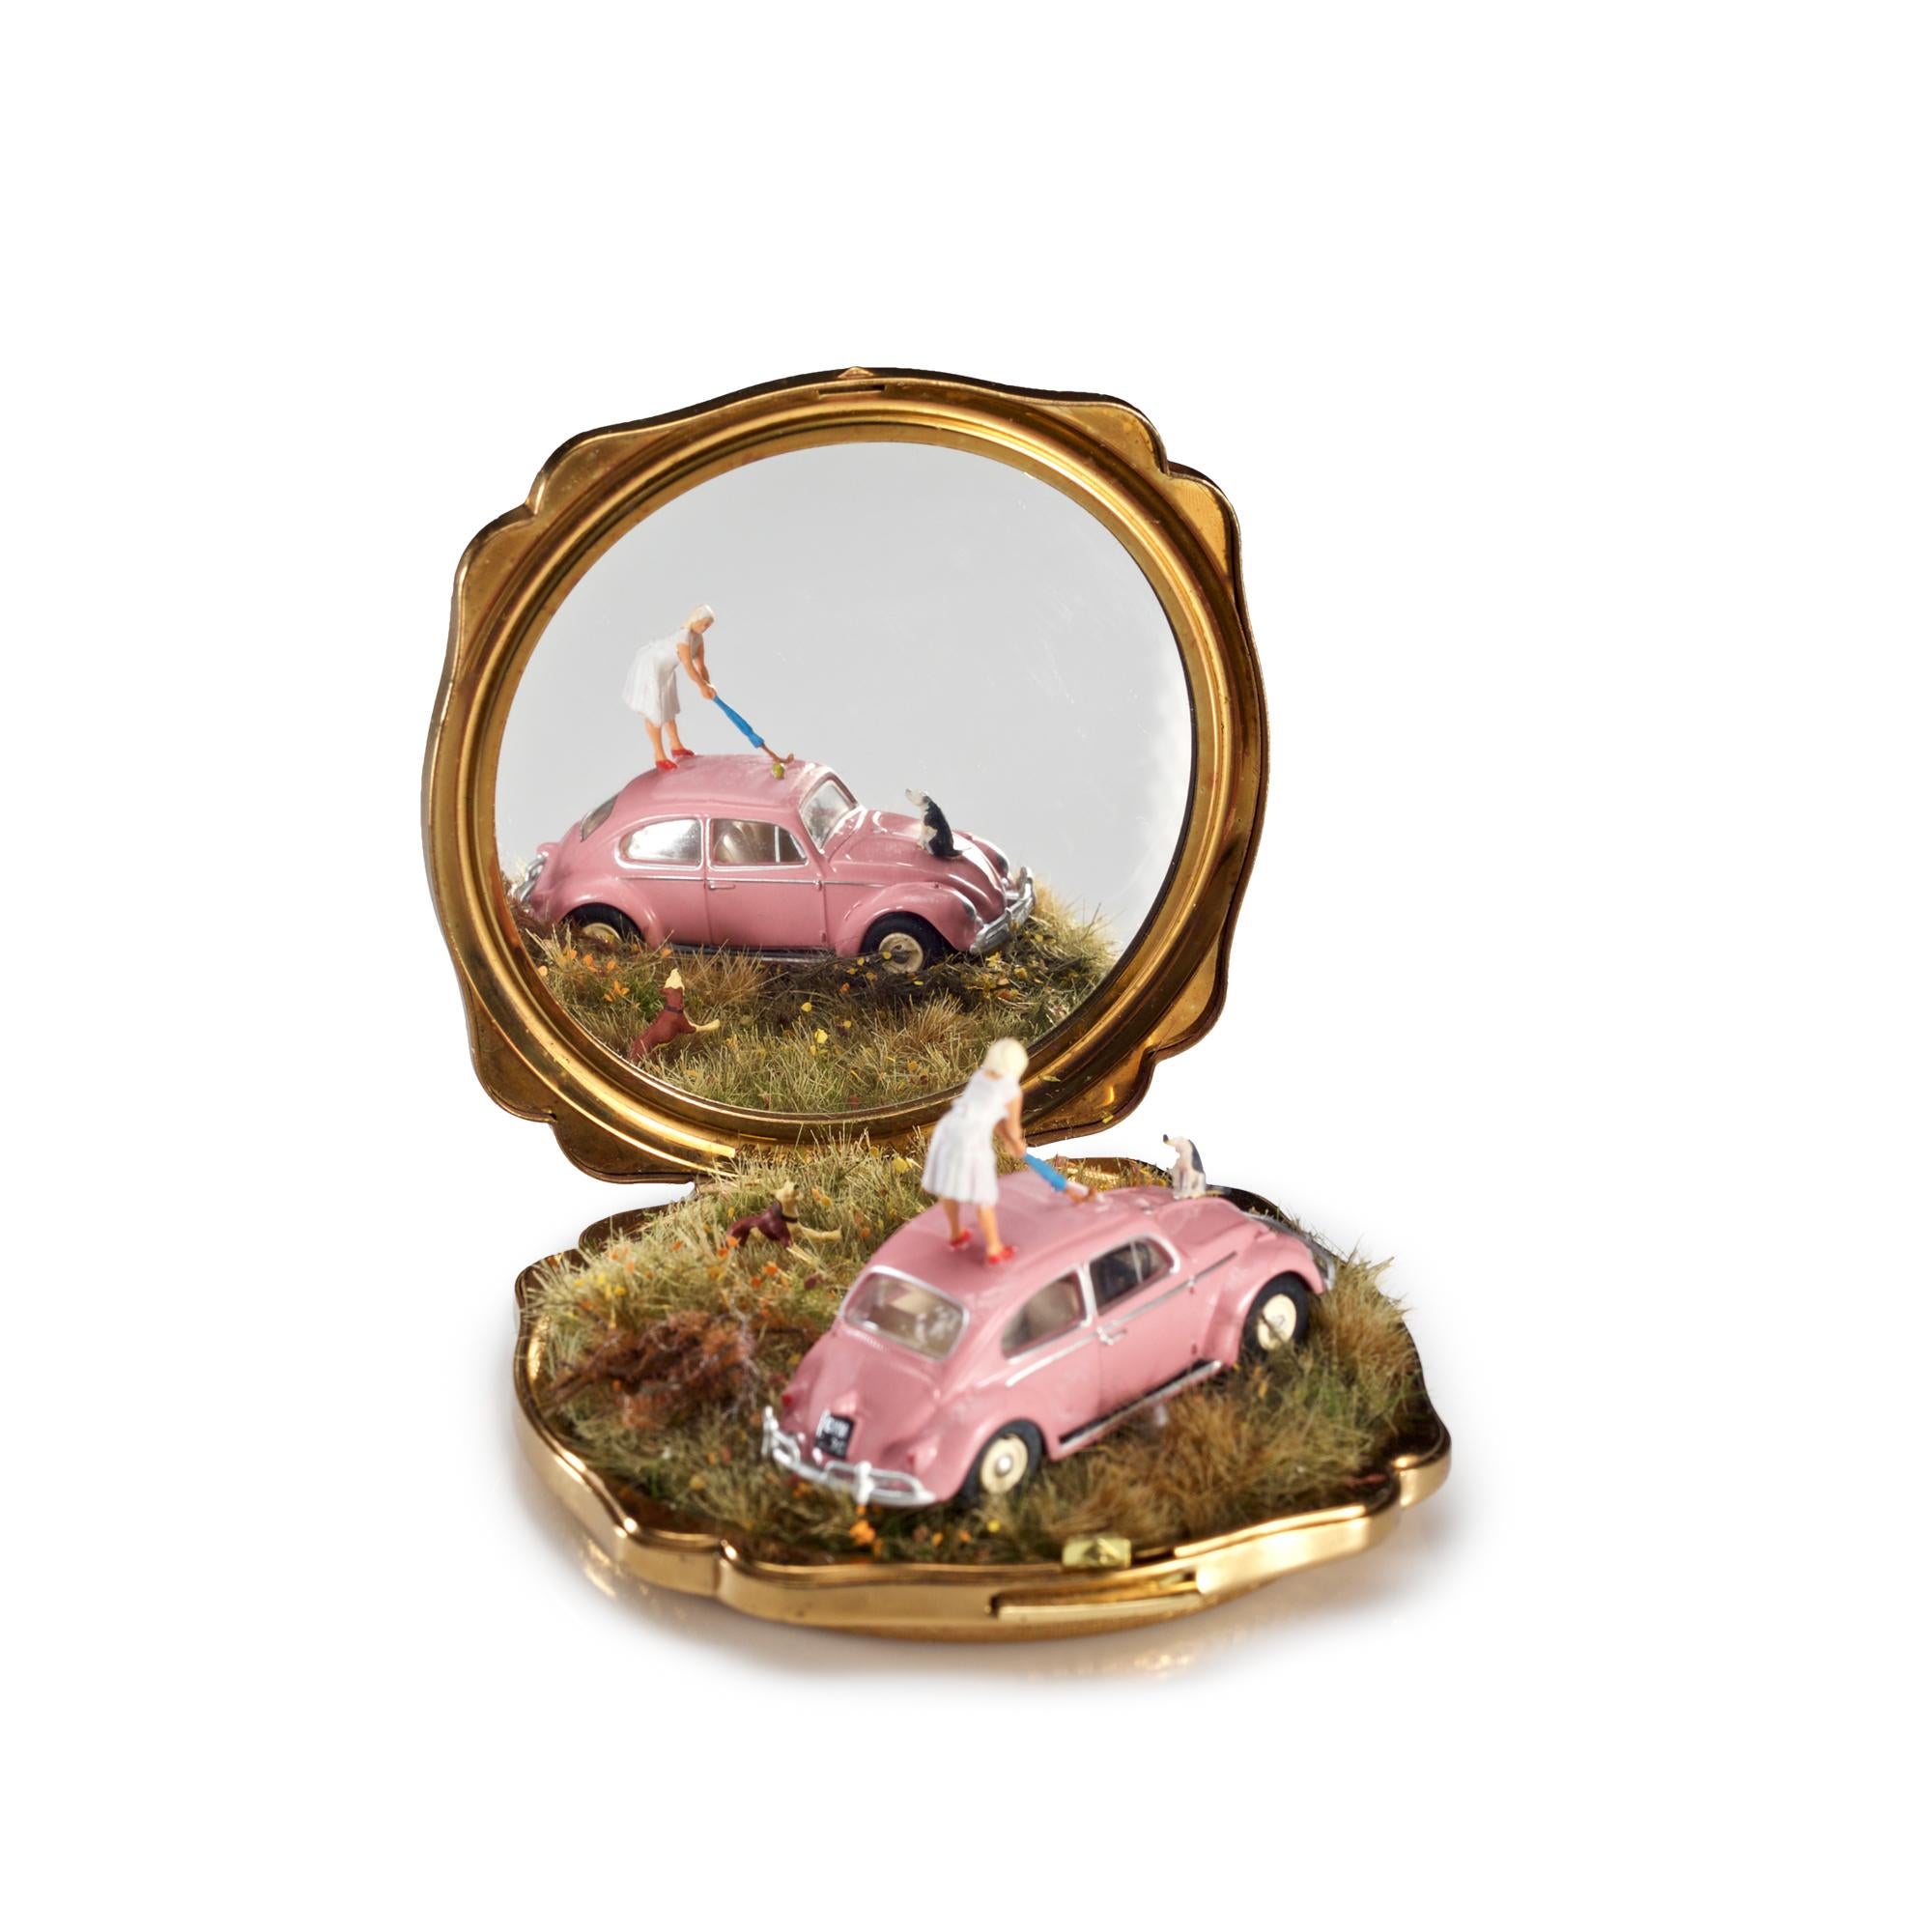 "Tantalize, Synchronize, Exercise!", Miniature compact and mirror landscape